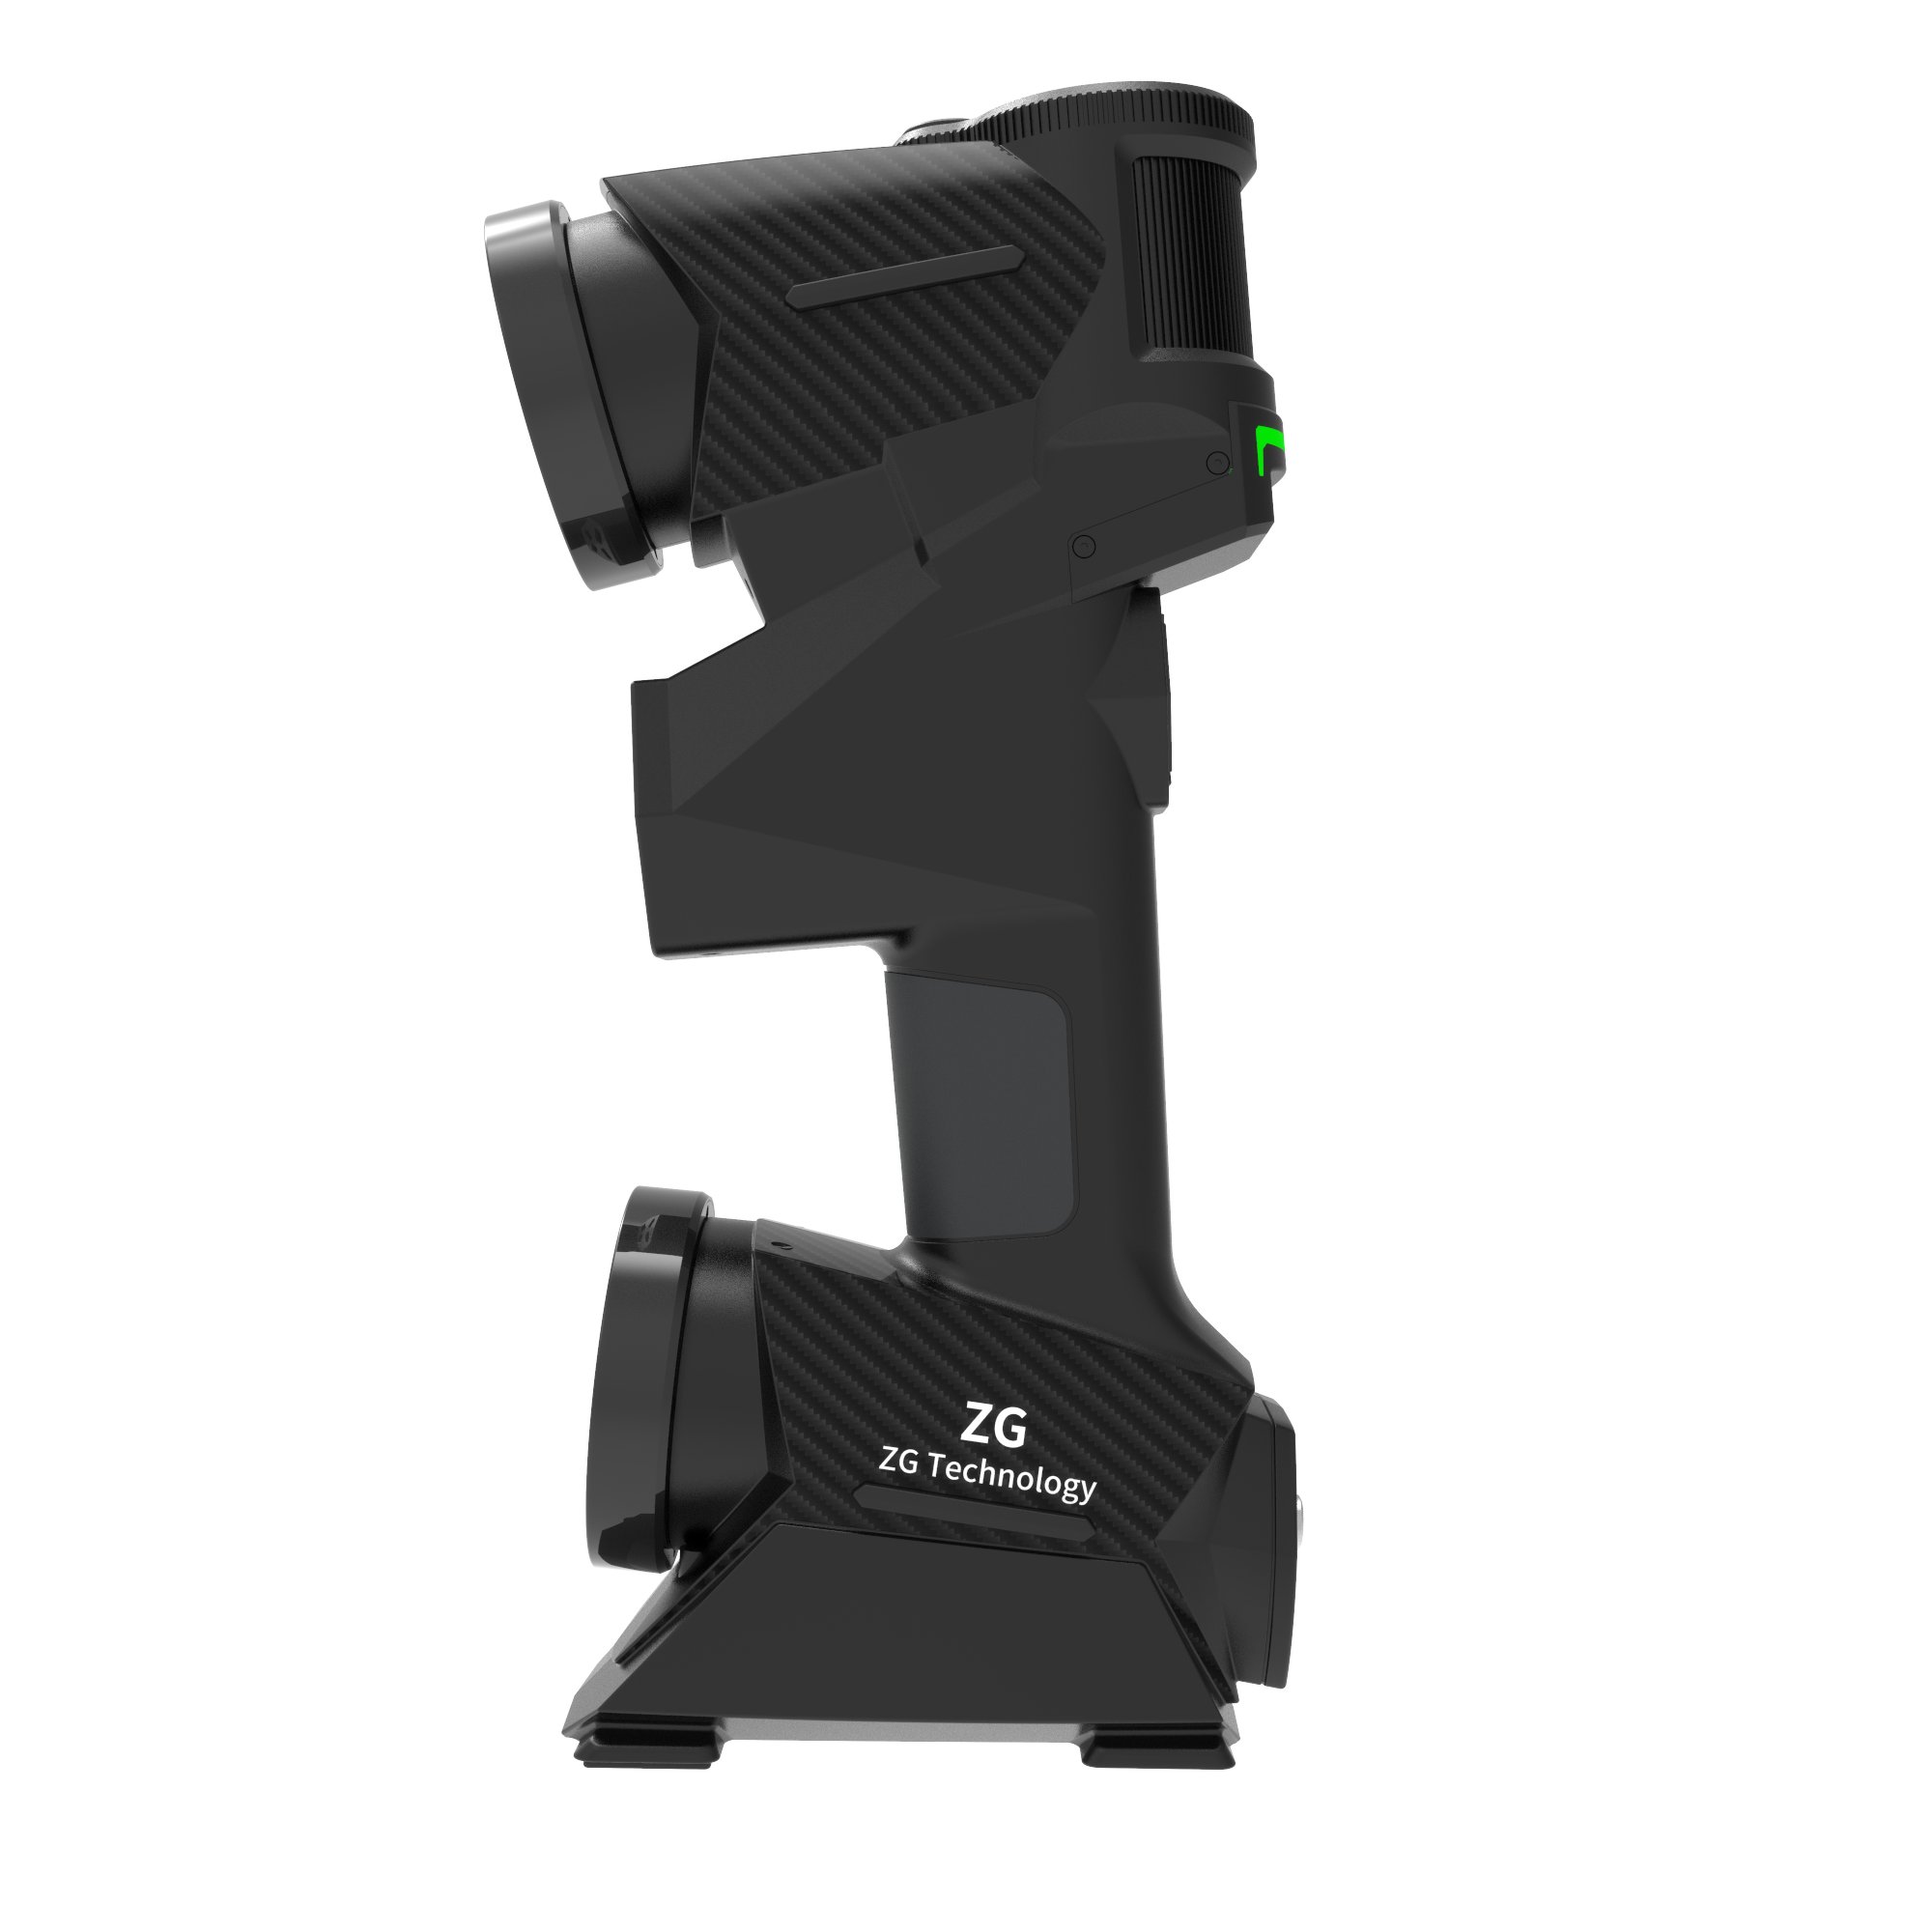 MarvelScan Tracker Free Marker Free Portable 3D Laser Scanner with Built-in Photogrammetry